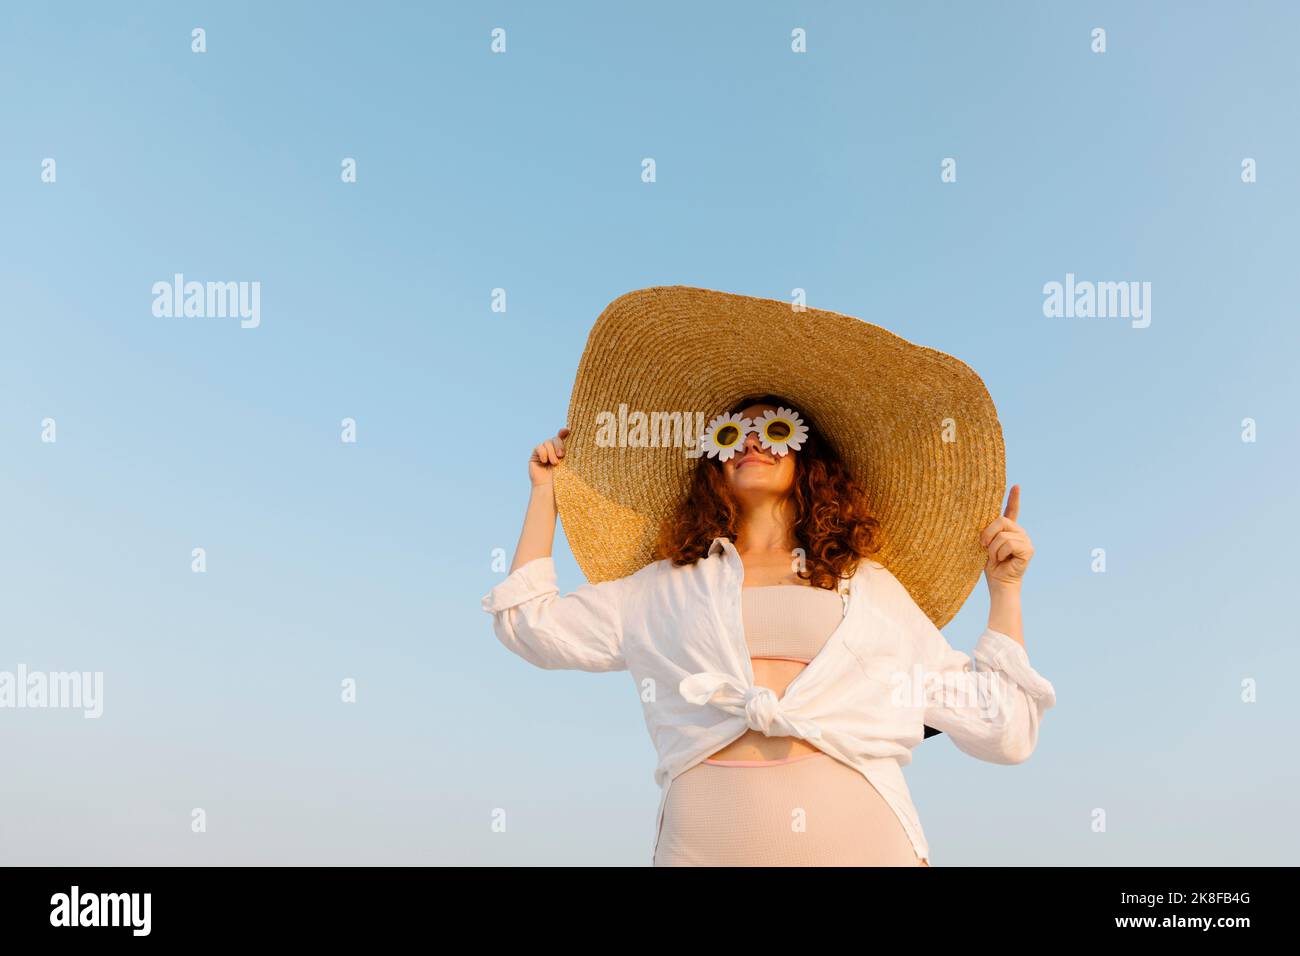 Smiling woman wearing sunflower sunglasses and oversized straw hat on sunny day Stock Photo